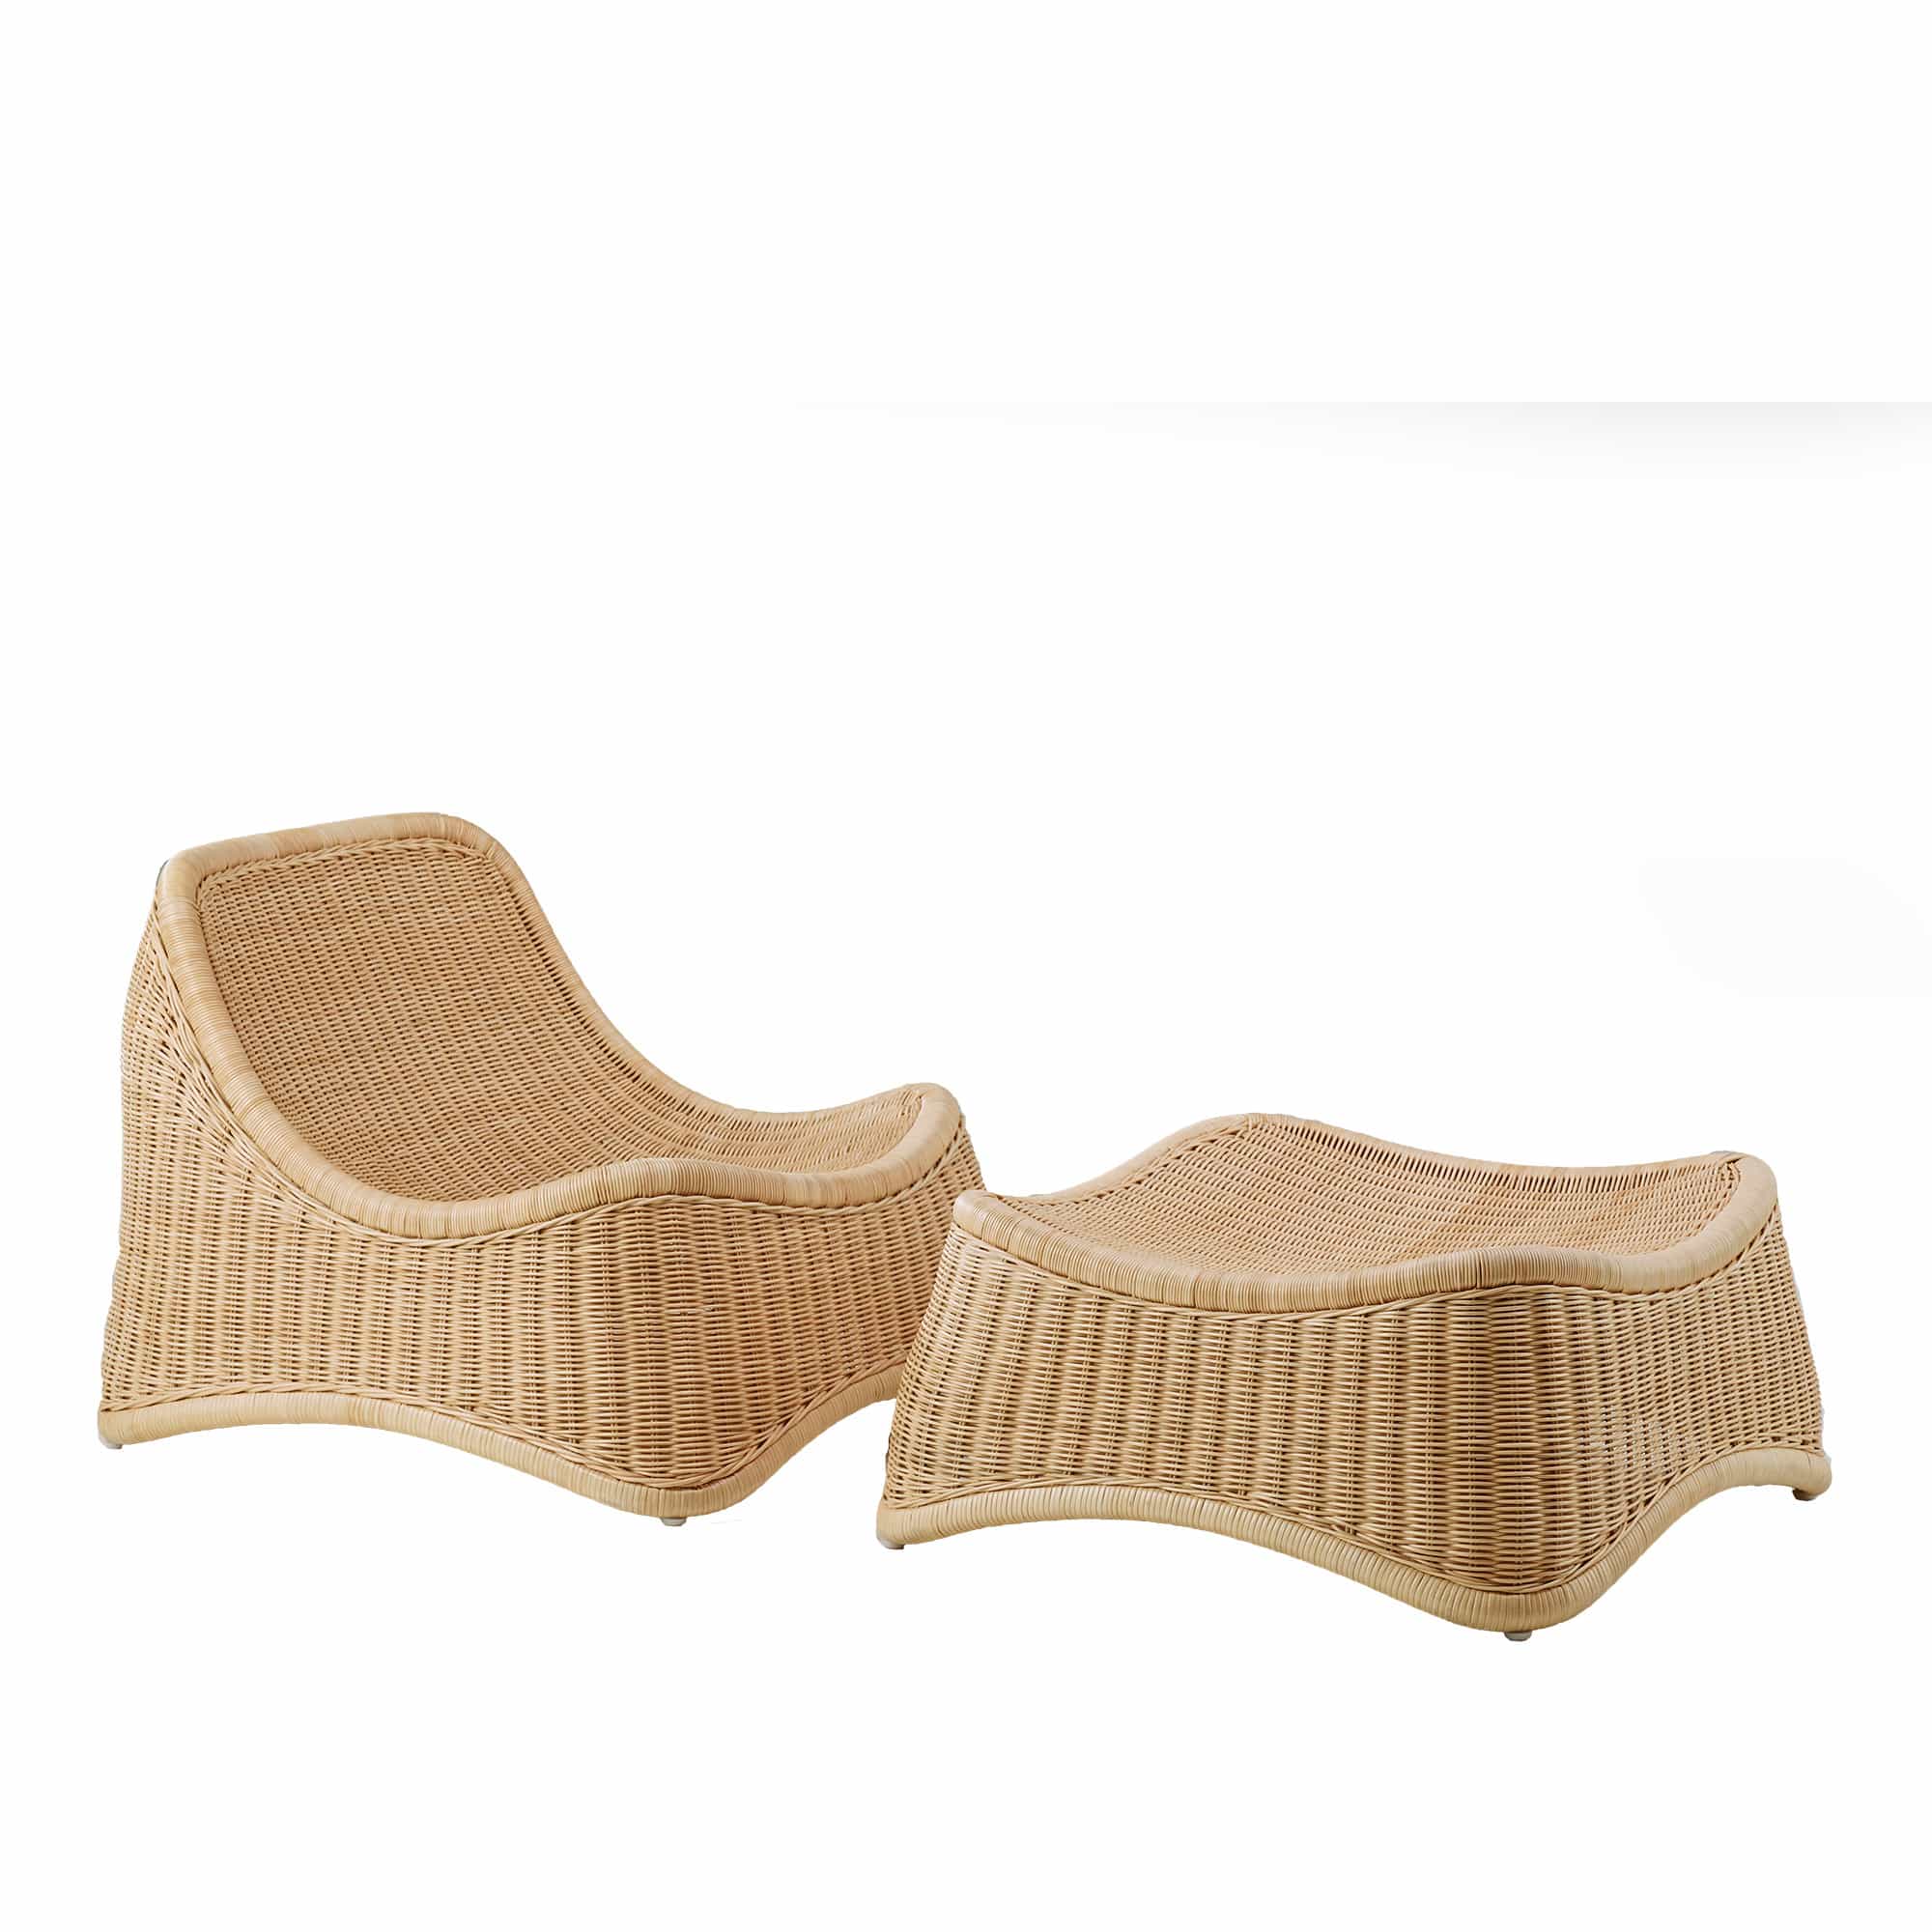 Chill Lounge Chair and stool